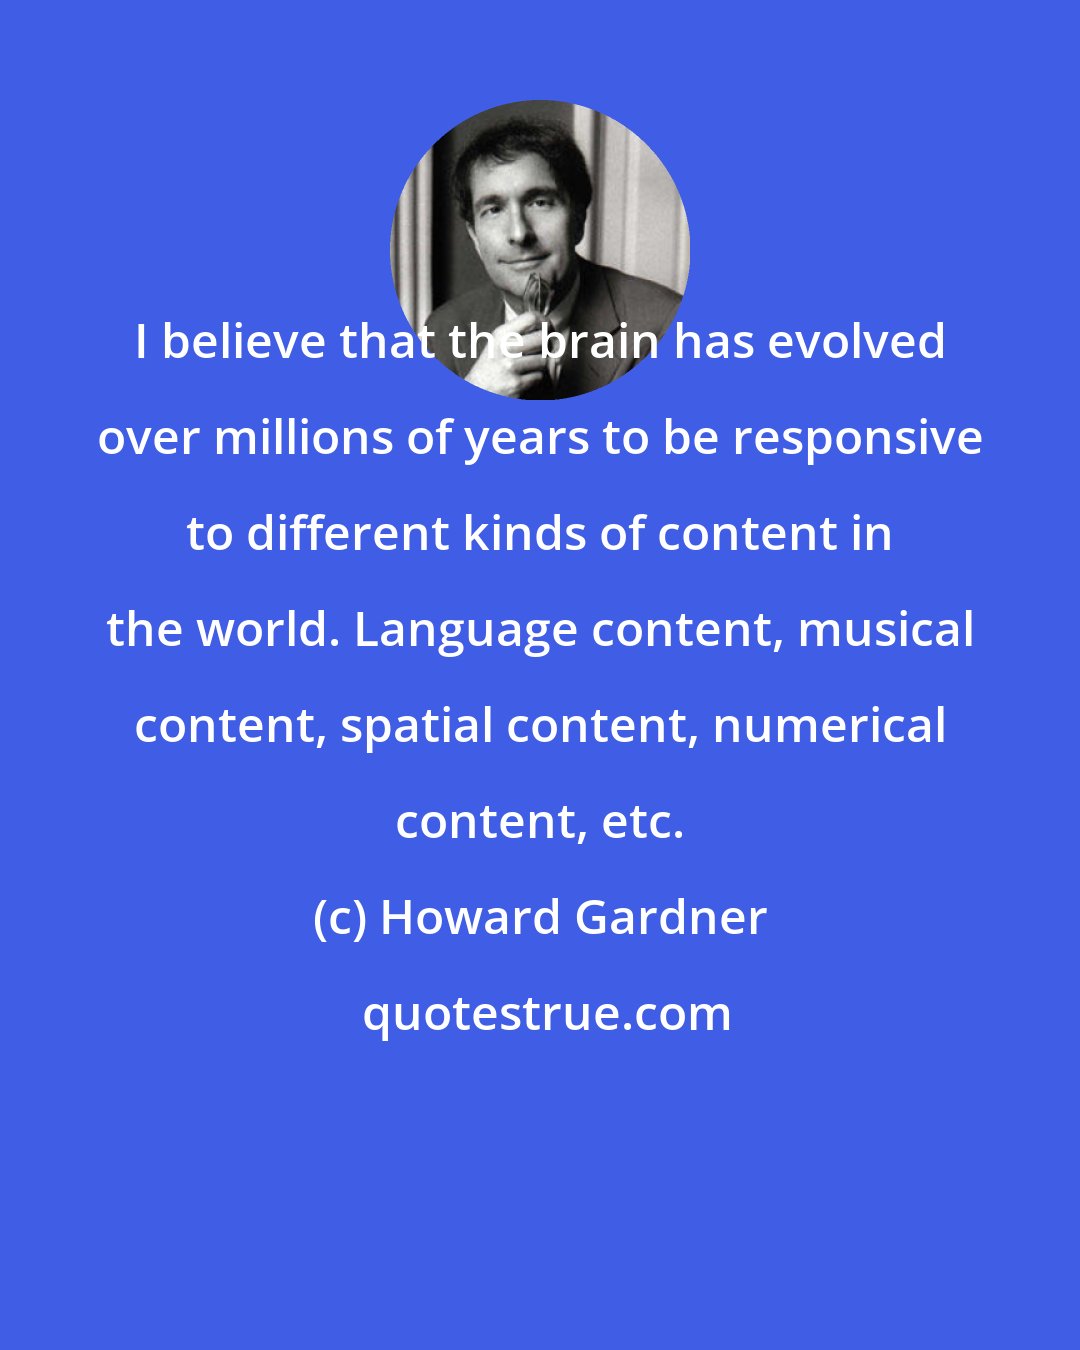 Howard Gardner: I believe that the brain has evolved over millions of years to be responsive to different kinds of content in the world. Language content, musical content, spatial content, numerical content, etc.